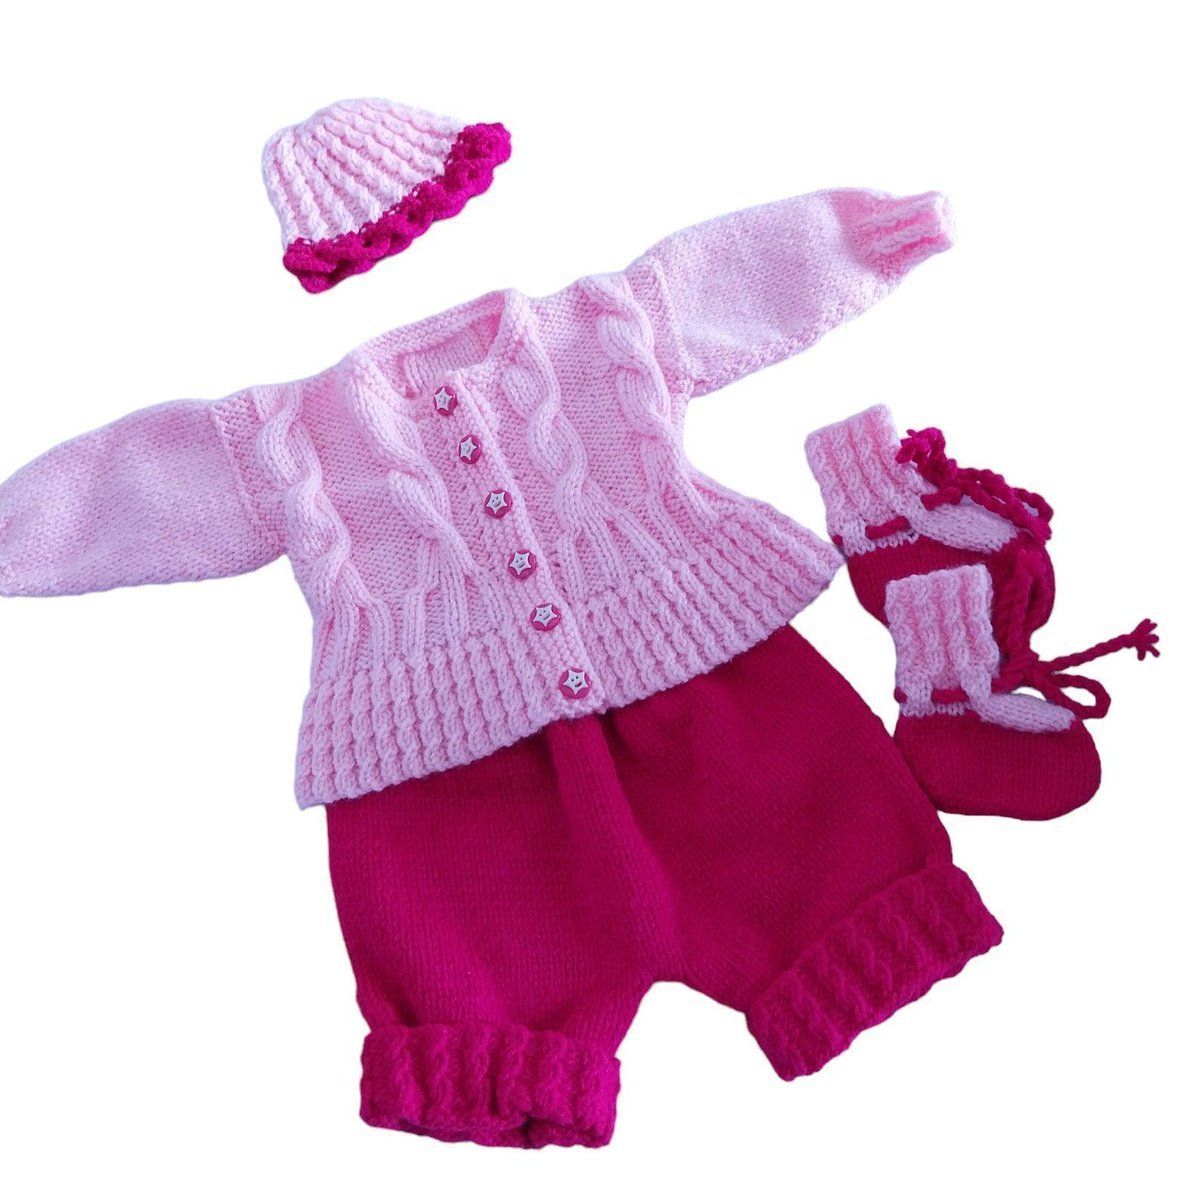 #MHHSBD 𝗞𝗻𝗶𝘁𝘁𝗲𝗱 𝗯𝗮𝗯𝘆 𝗰𝗹𝗼𝘁𝗵𝗲𝘀 Hand-knitted Baby Pink Cardigan, Shorts, Hat, and Booties Set for 0-3 months. Cardigan has cable patterns and buttons. Shorts have cable turn-ups. Hat with pink edge. Booties tie at ankle. knittingtopia.etsy.com/listing/169362…